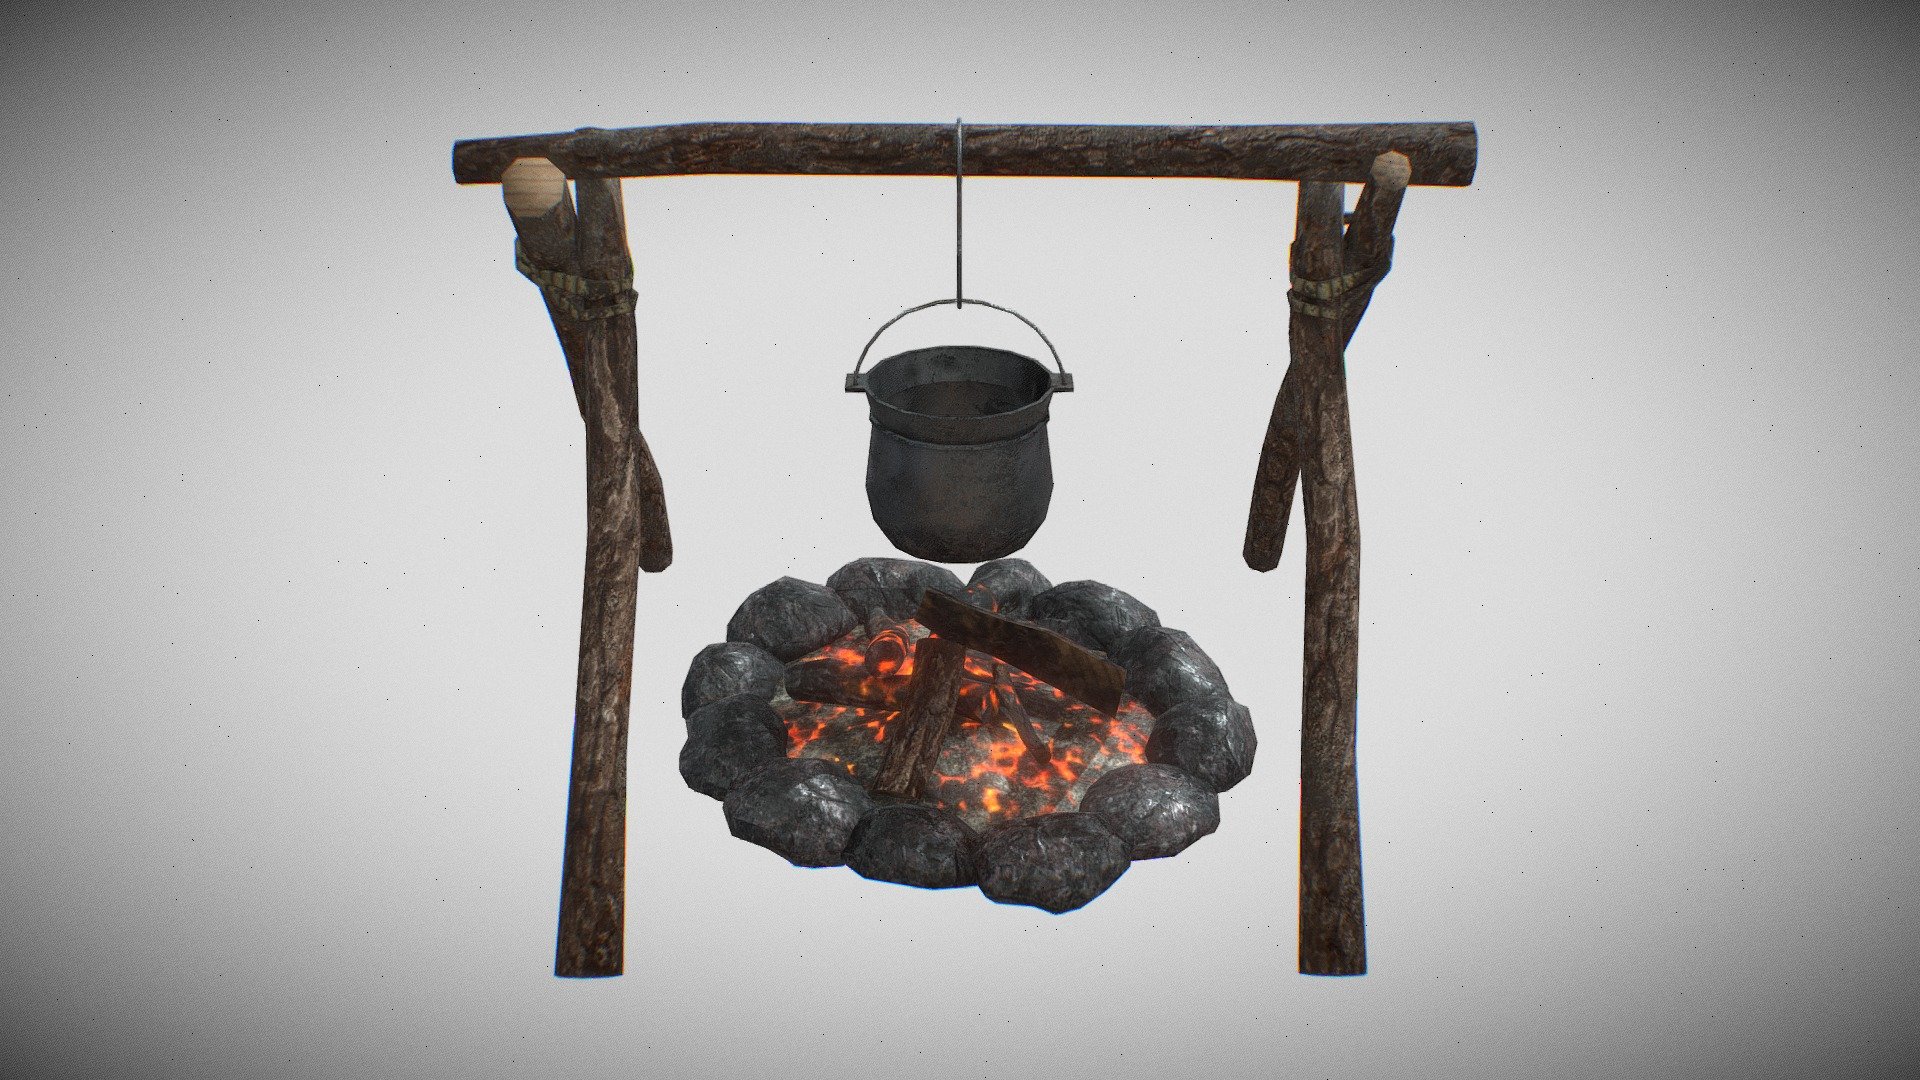 Introducing the Campfire Cooking Station Model:

This model is available in versatile file formats including .obj, .fbx, and .blend, ensuring seamless integration into various gaming platforms and 3D environments.

Key Features:

Geometry and Detailing:
The model boasts intricate detailing with precisely crafted 2503 vertices and 4900 faces.

Versatile File Formats:
The model is provided in popular and widely compatible file formats including .obj, .fbx, and .blend. This ensures compatibility across a broad range of 3D software and gaming engines.

Optimized Textures for Games:
The Campfire Cooking Station Model includes meticulously optimized PBR textures, ensuring optimal performance within gaming environments. The textures are carefully designed to balance quality and performance.

High-Quality Materials.
The model is crafted with high-quality materials, enhancing its overall visual appeal and realism 3d model